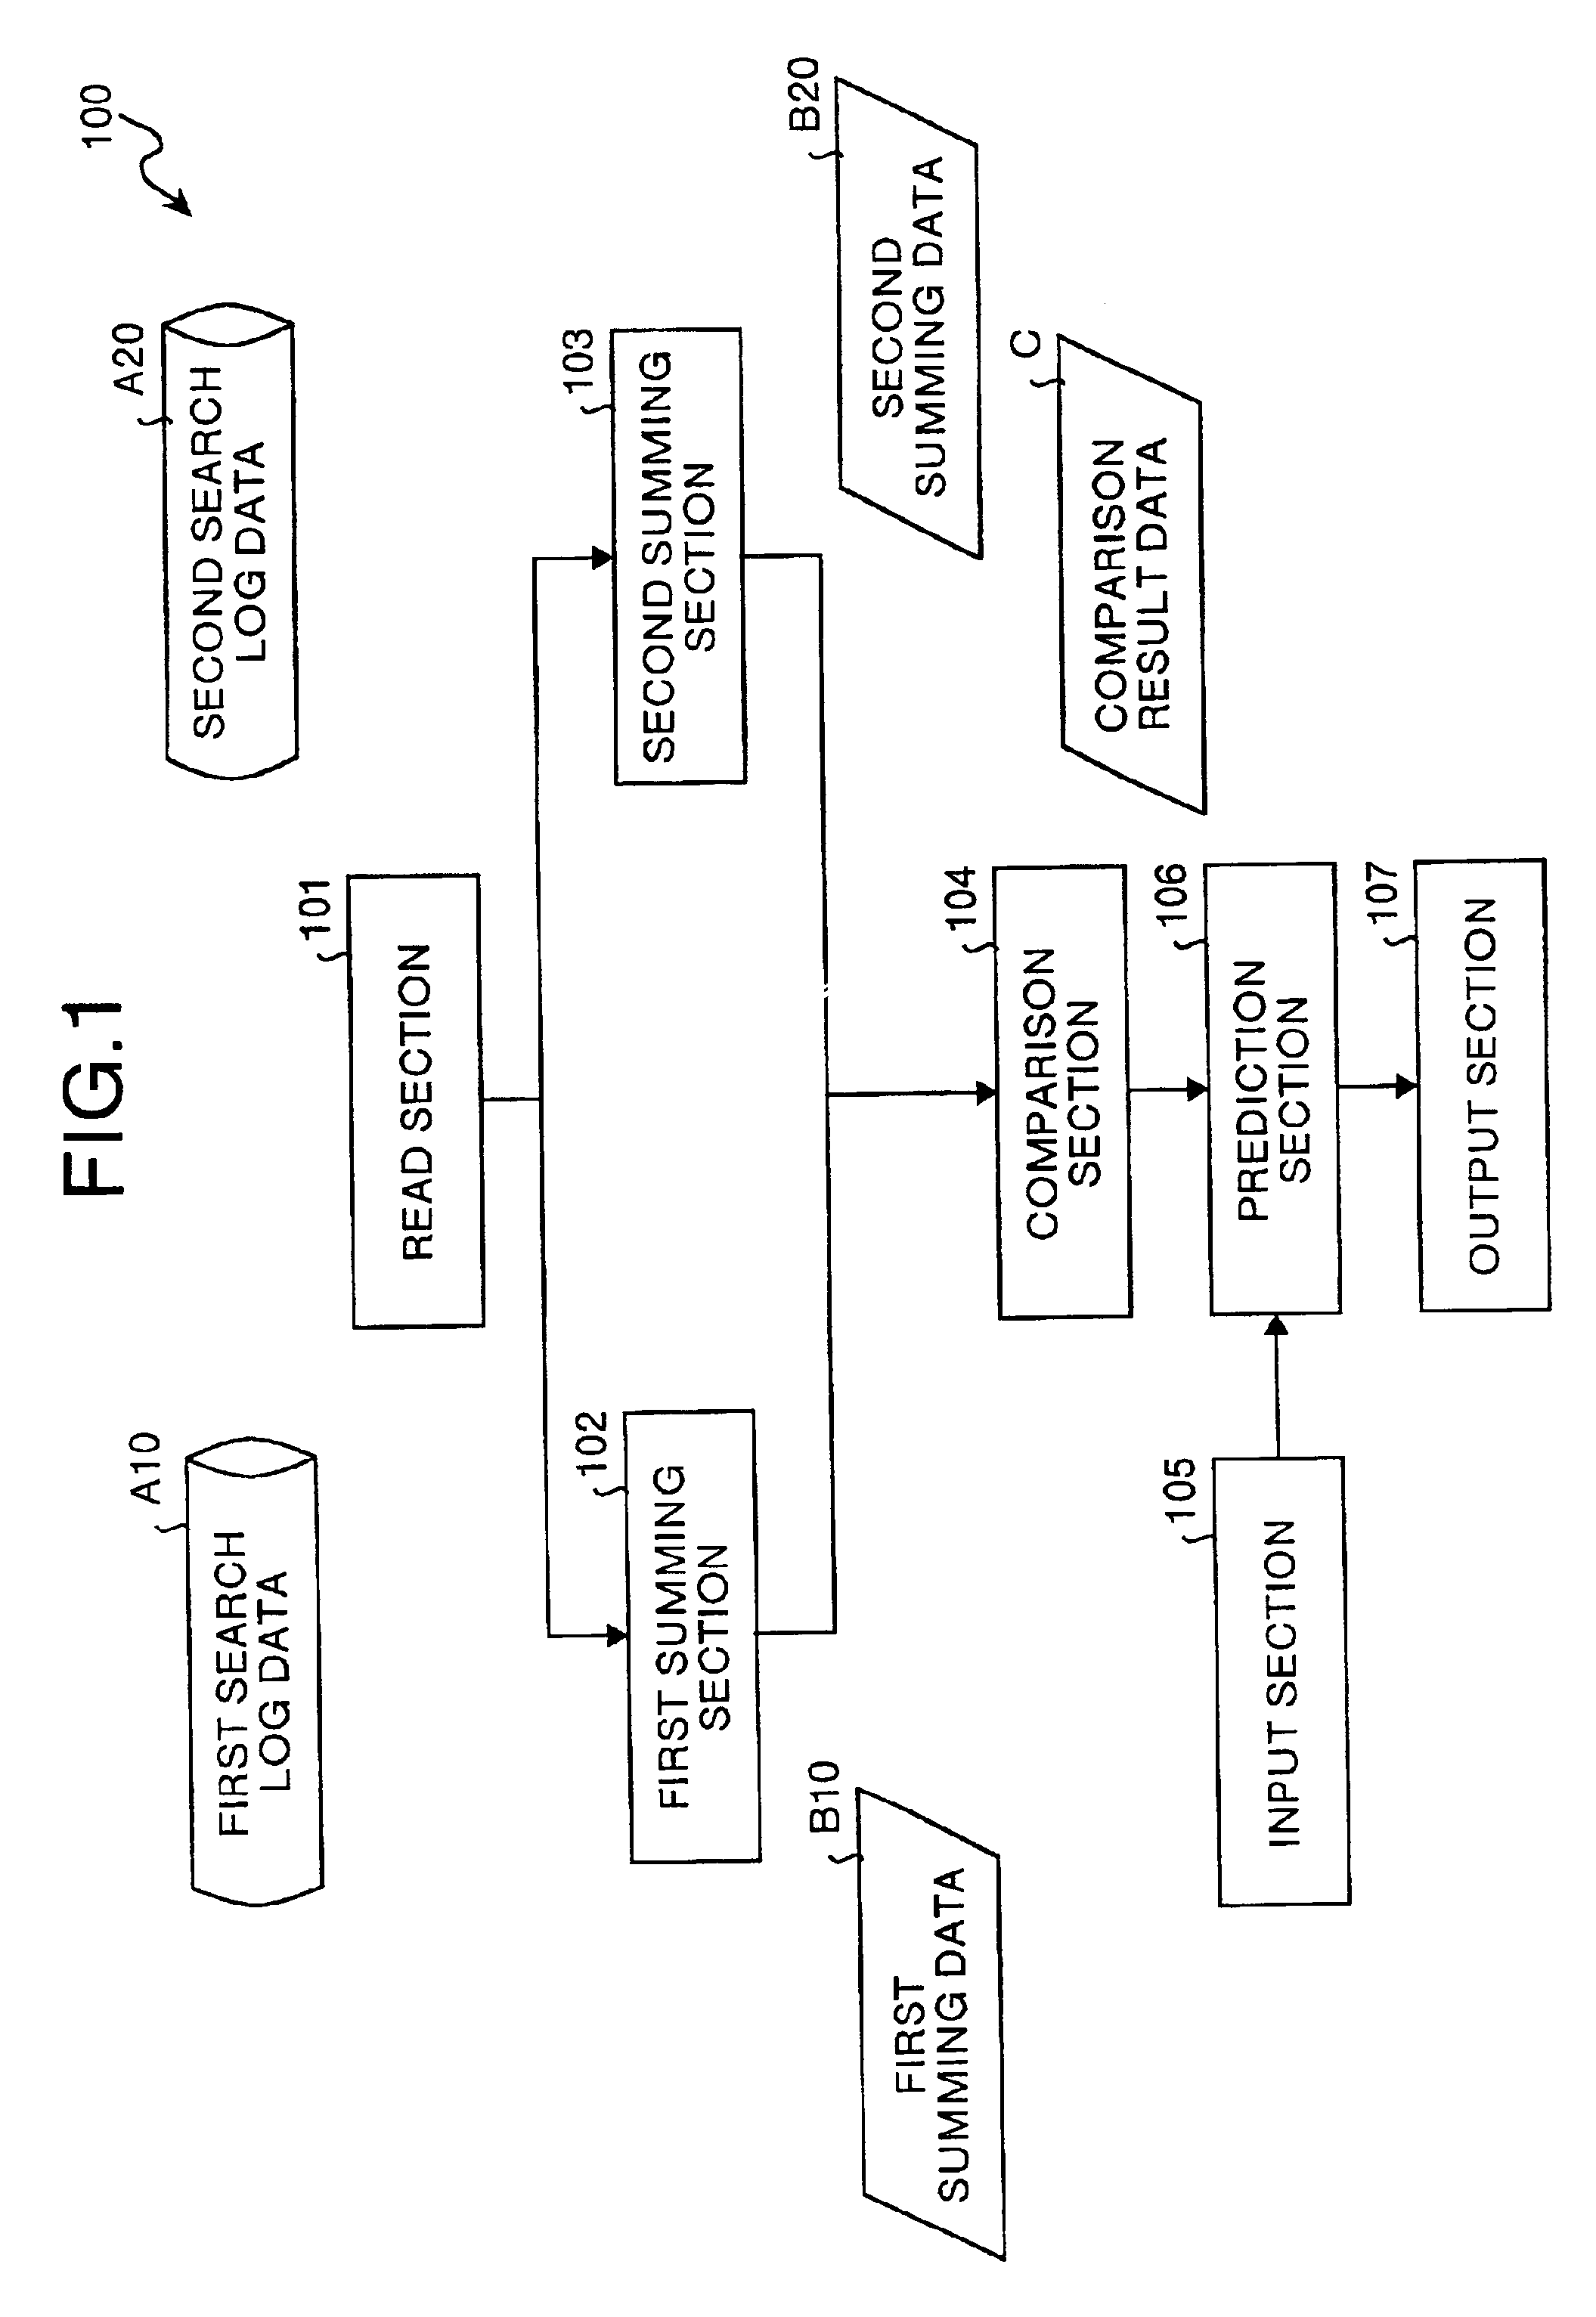 Information use frequency prediction program, information use frequency prediction method, and information use frequency prediction apparatus